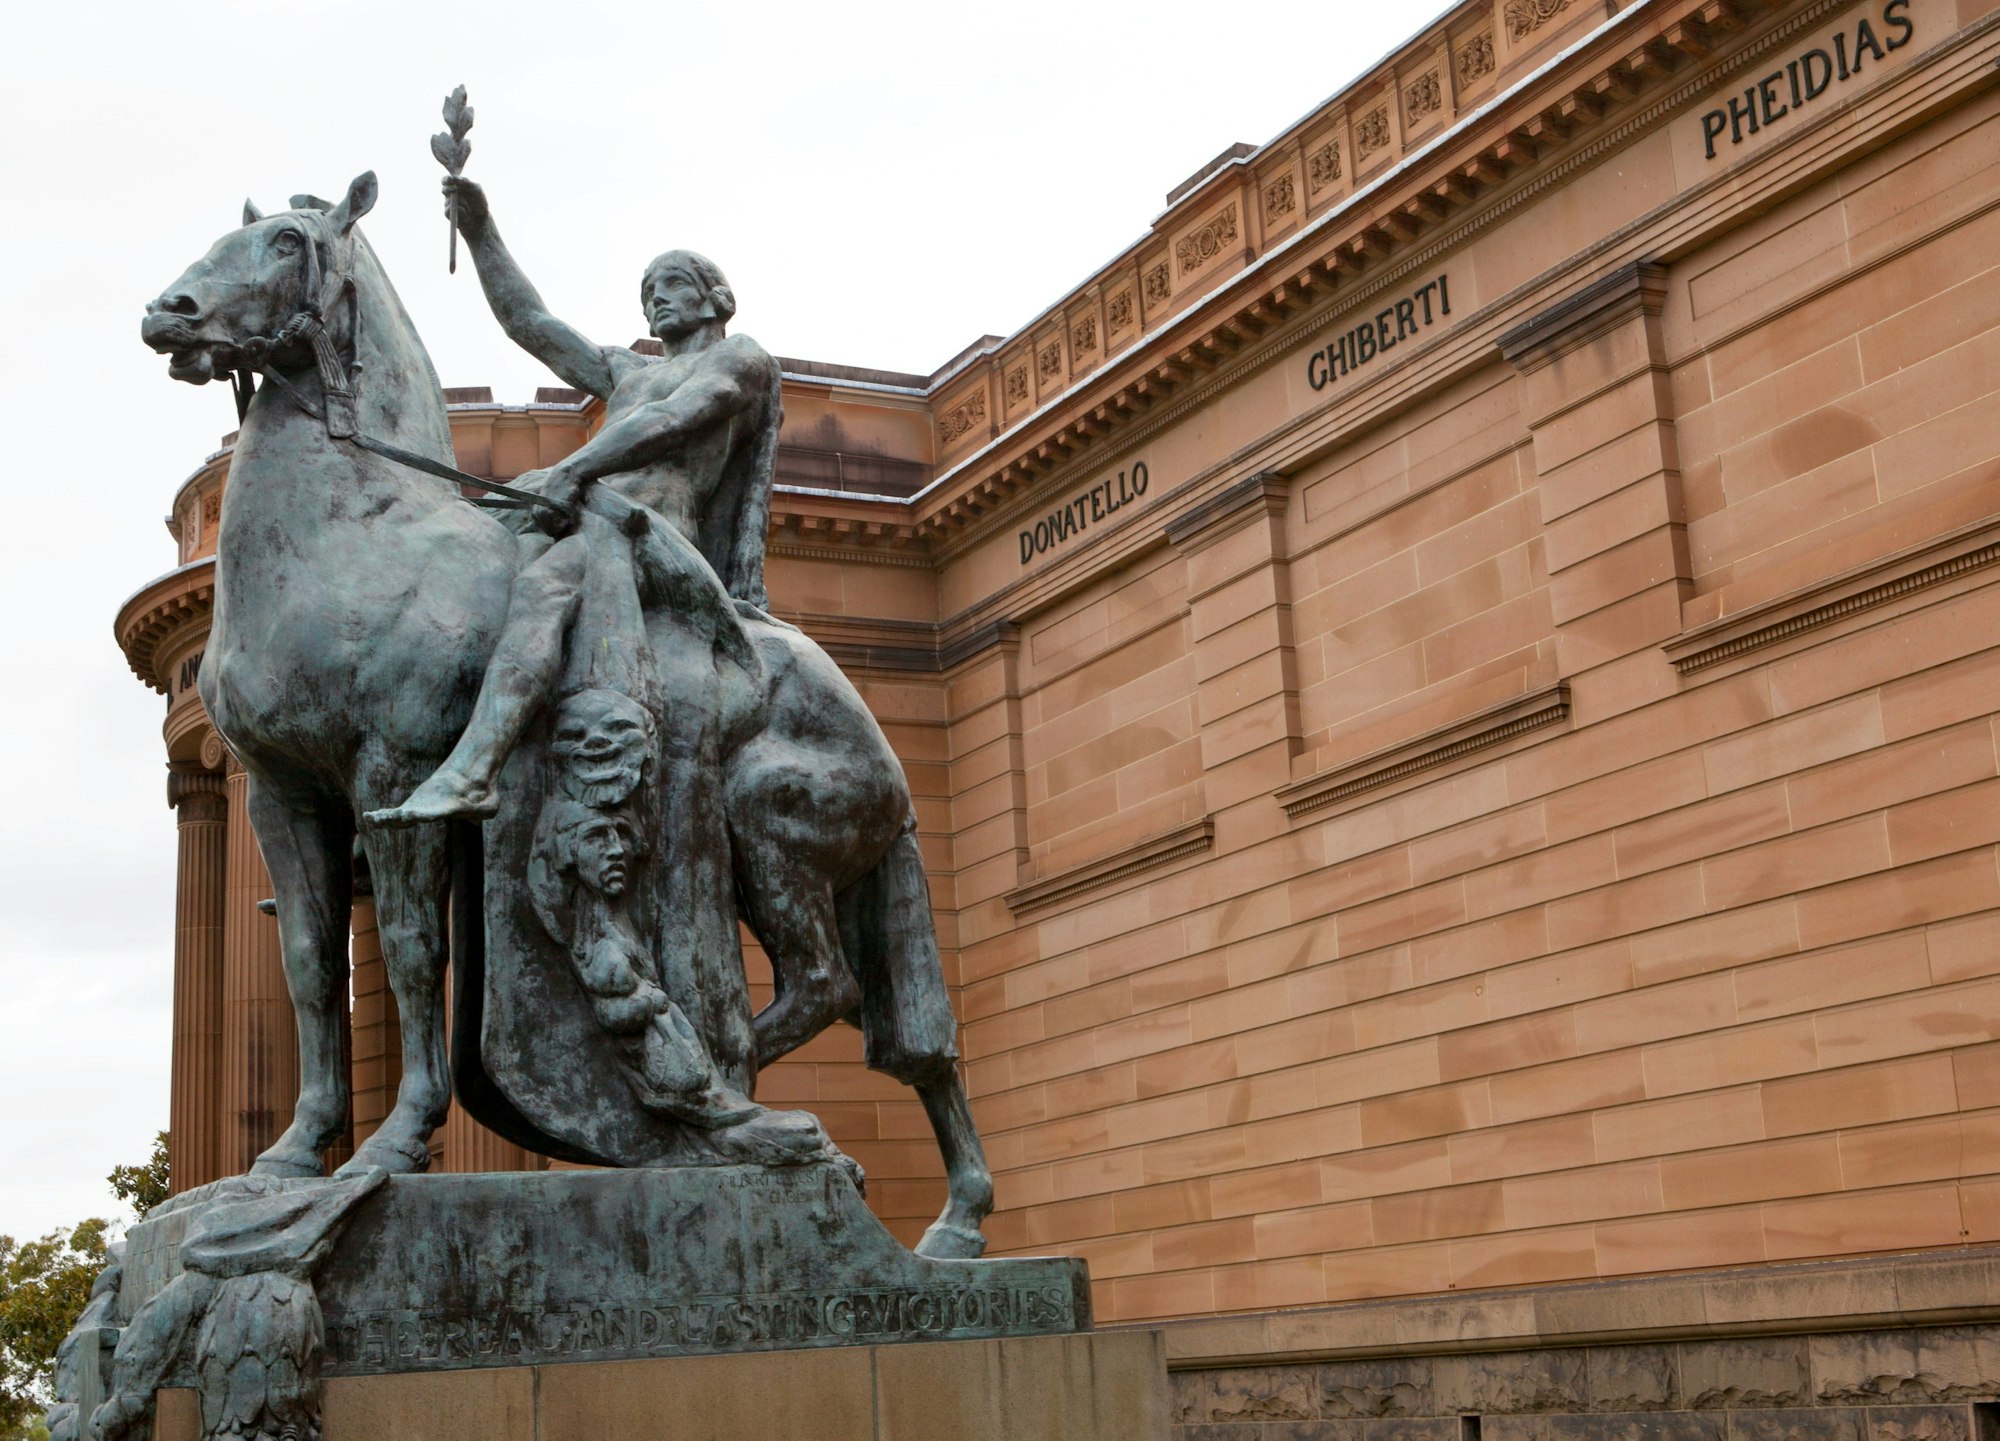 A statue of a person holding up a branch while seated on a horse in front of a large sandstone building.